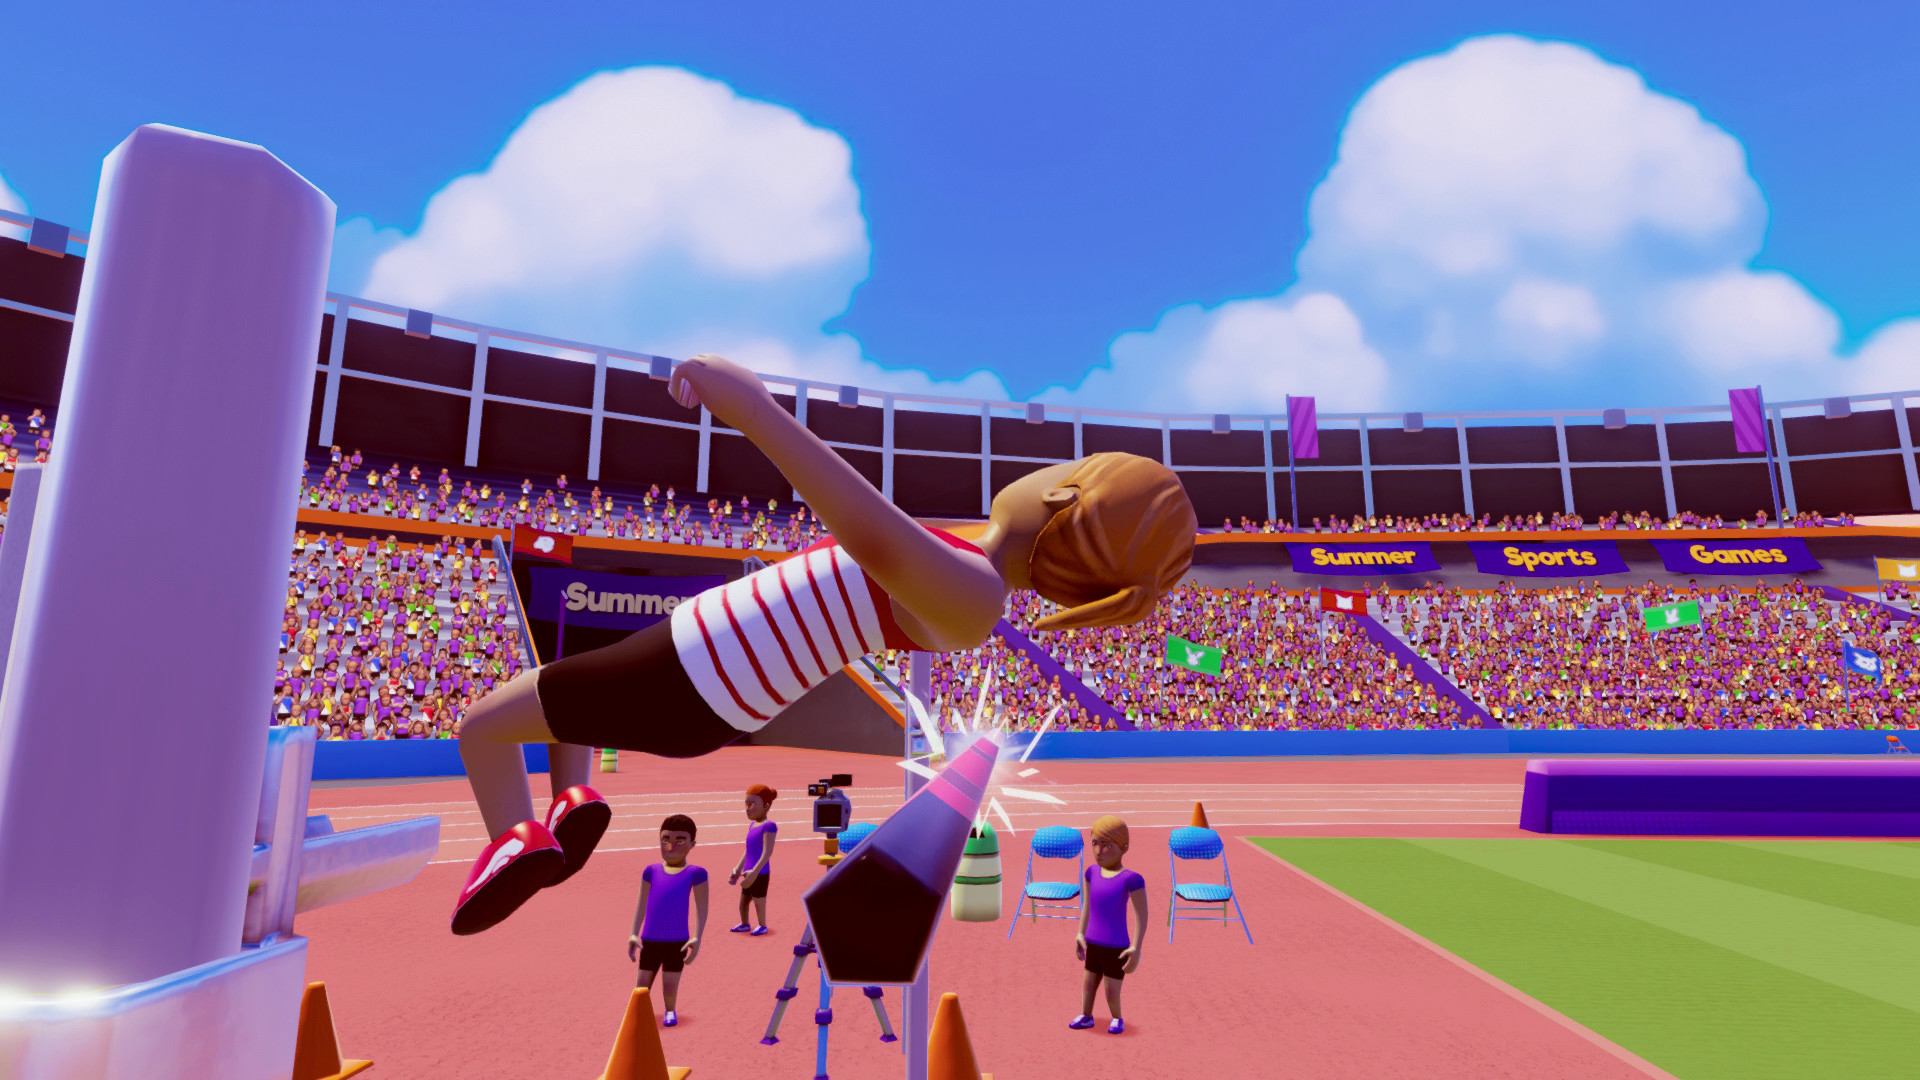 Summer Sports Games Free Download